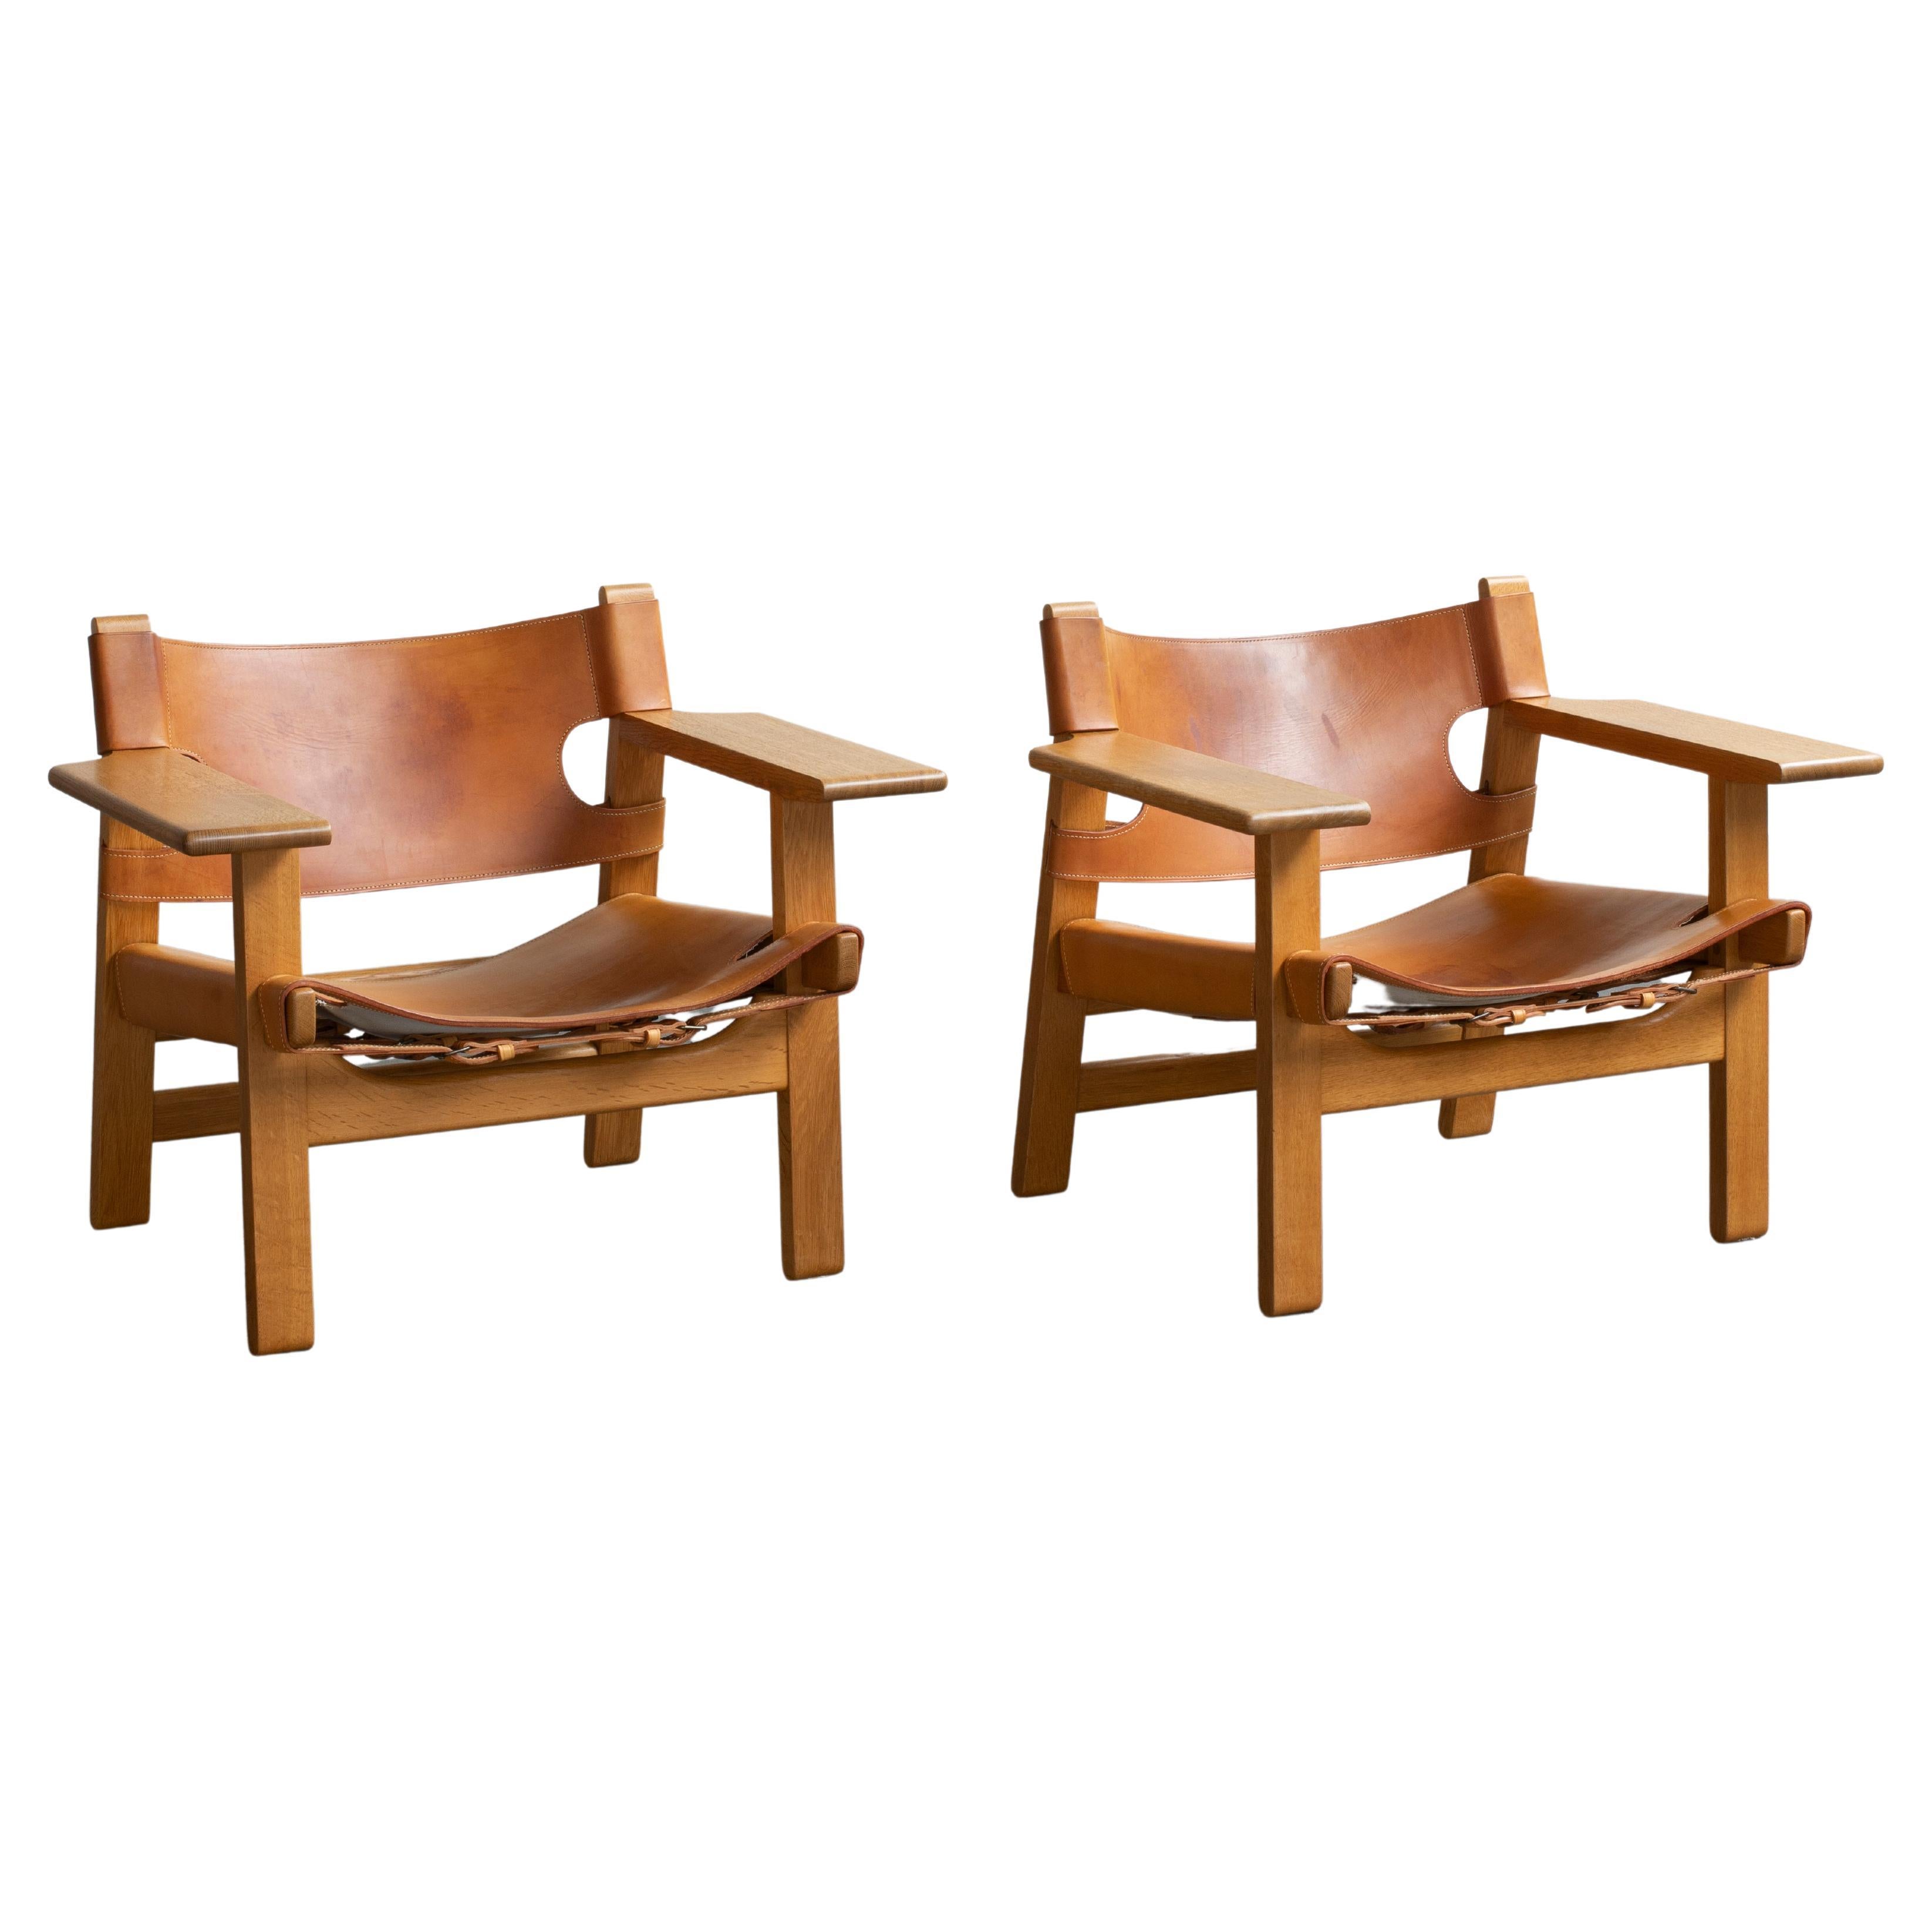 Børge Mogensen Pair of Spanish Chairs for Fredericia Furniture